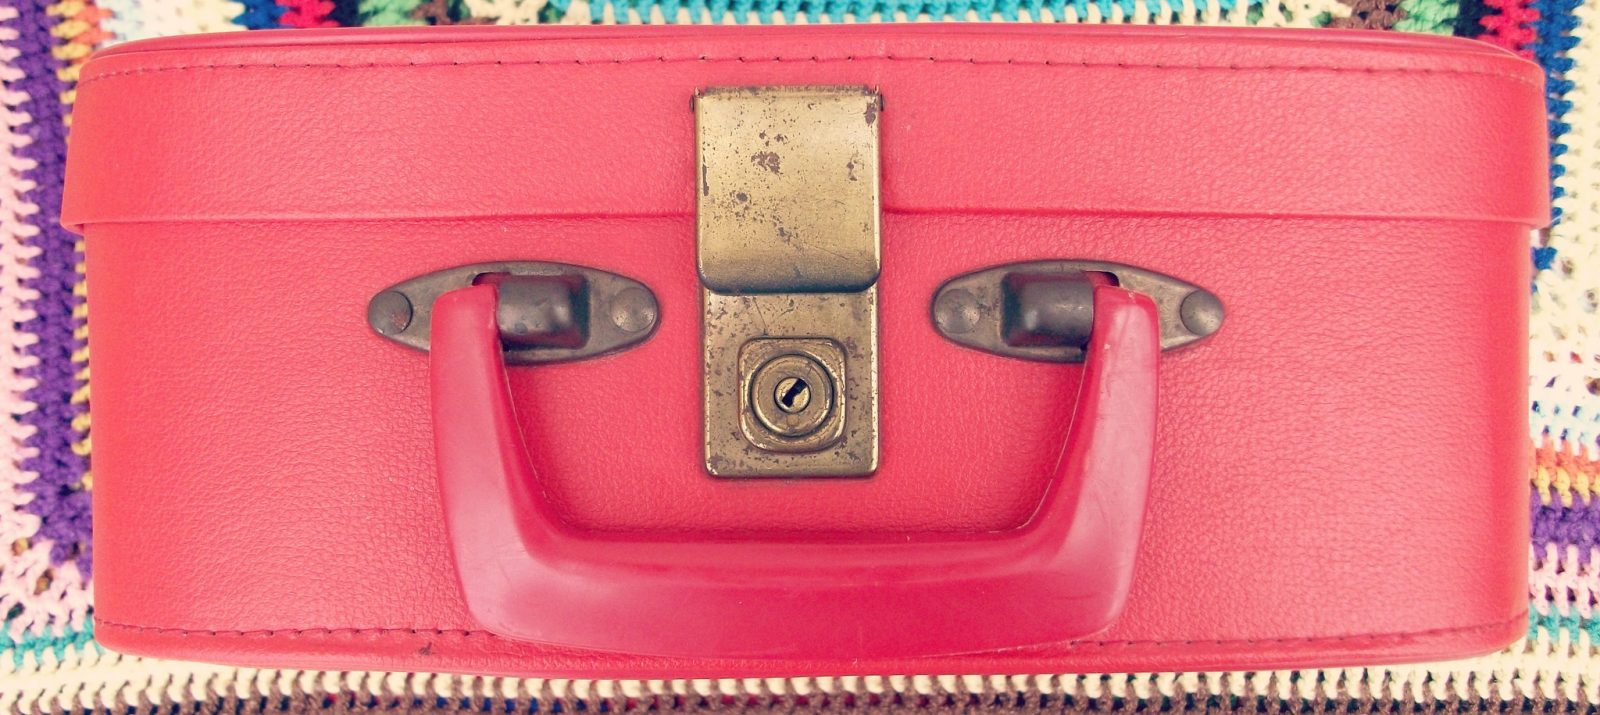 https://www.clutter.com/blog/wp-content/uploads/2016/11/15182514/small-red-suitcase-1600x715.jpg